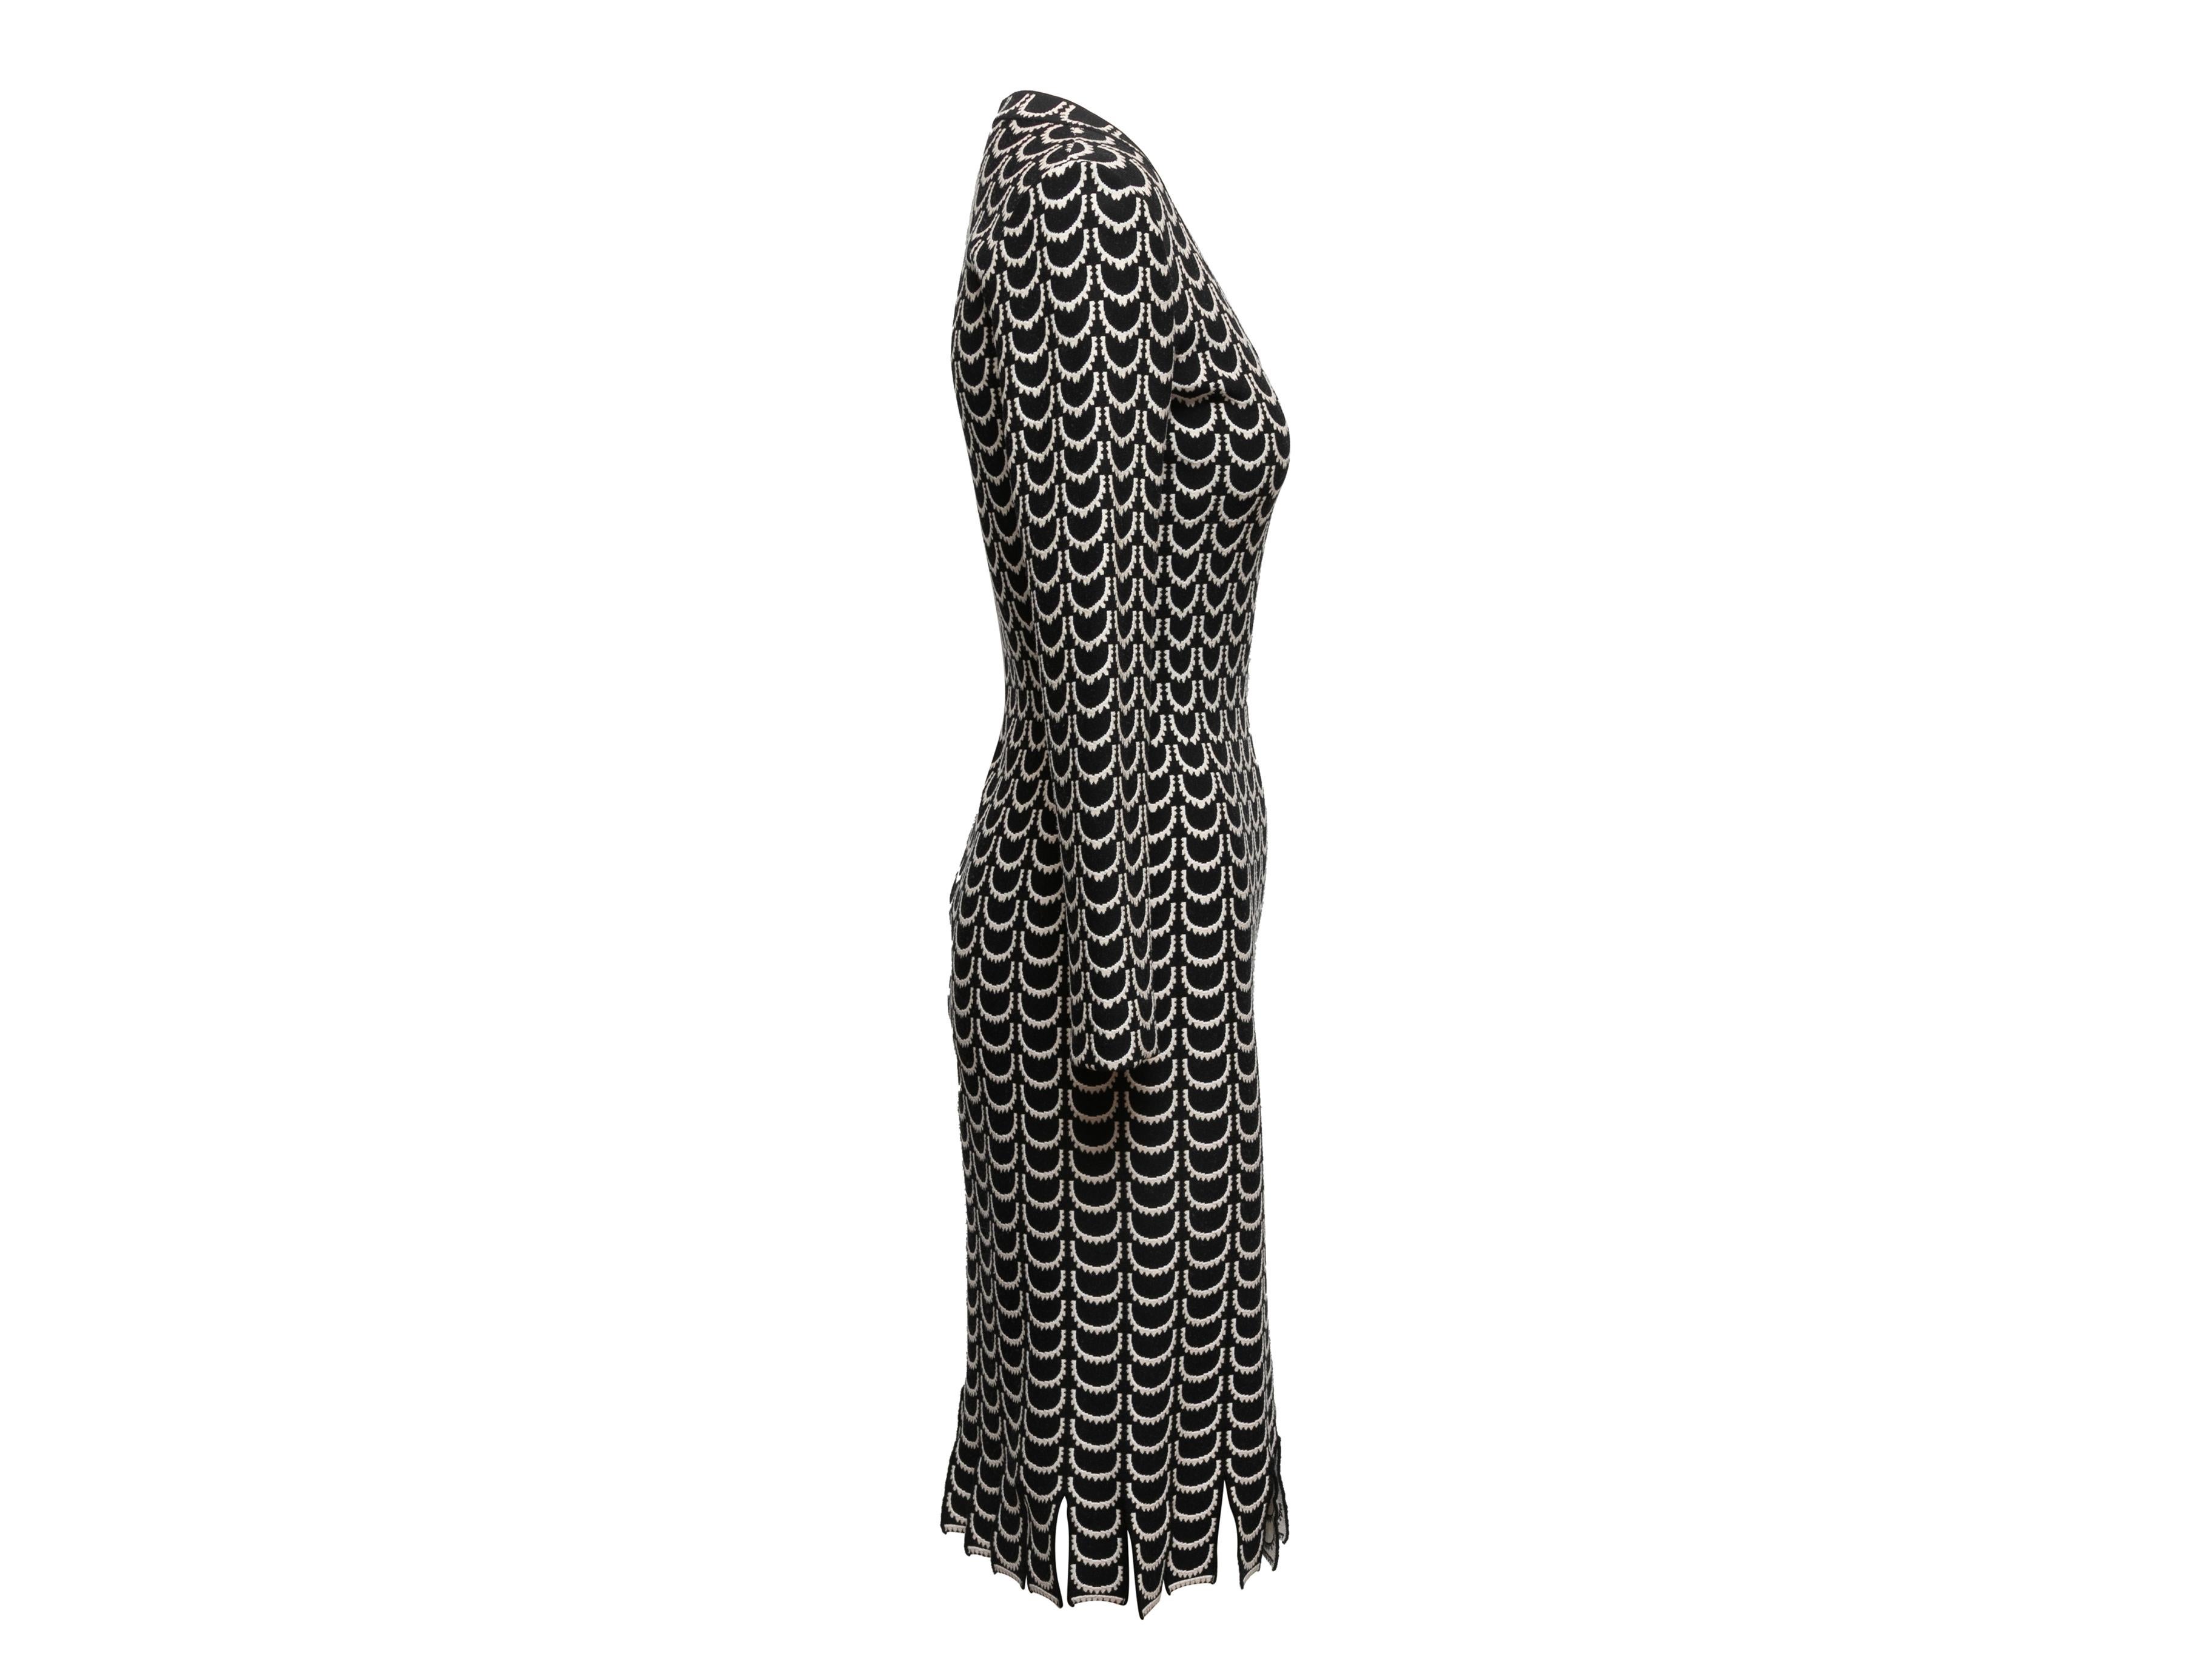 Black & White Alaia Knit Patterned Dress Size EU 40 In Good Condition For Sale In New York, NY